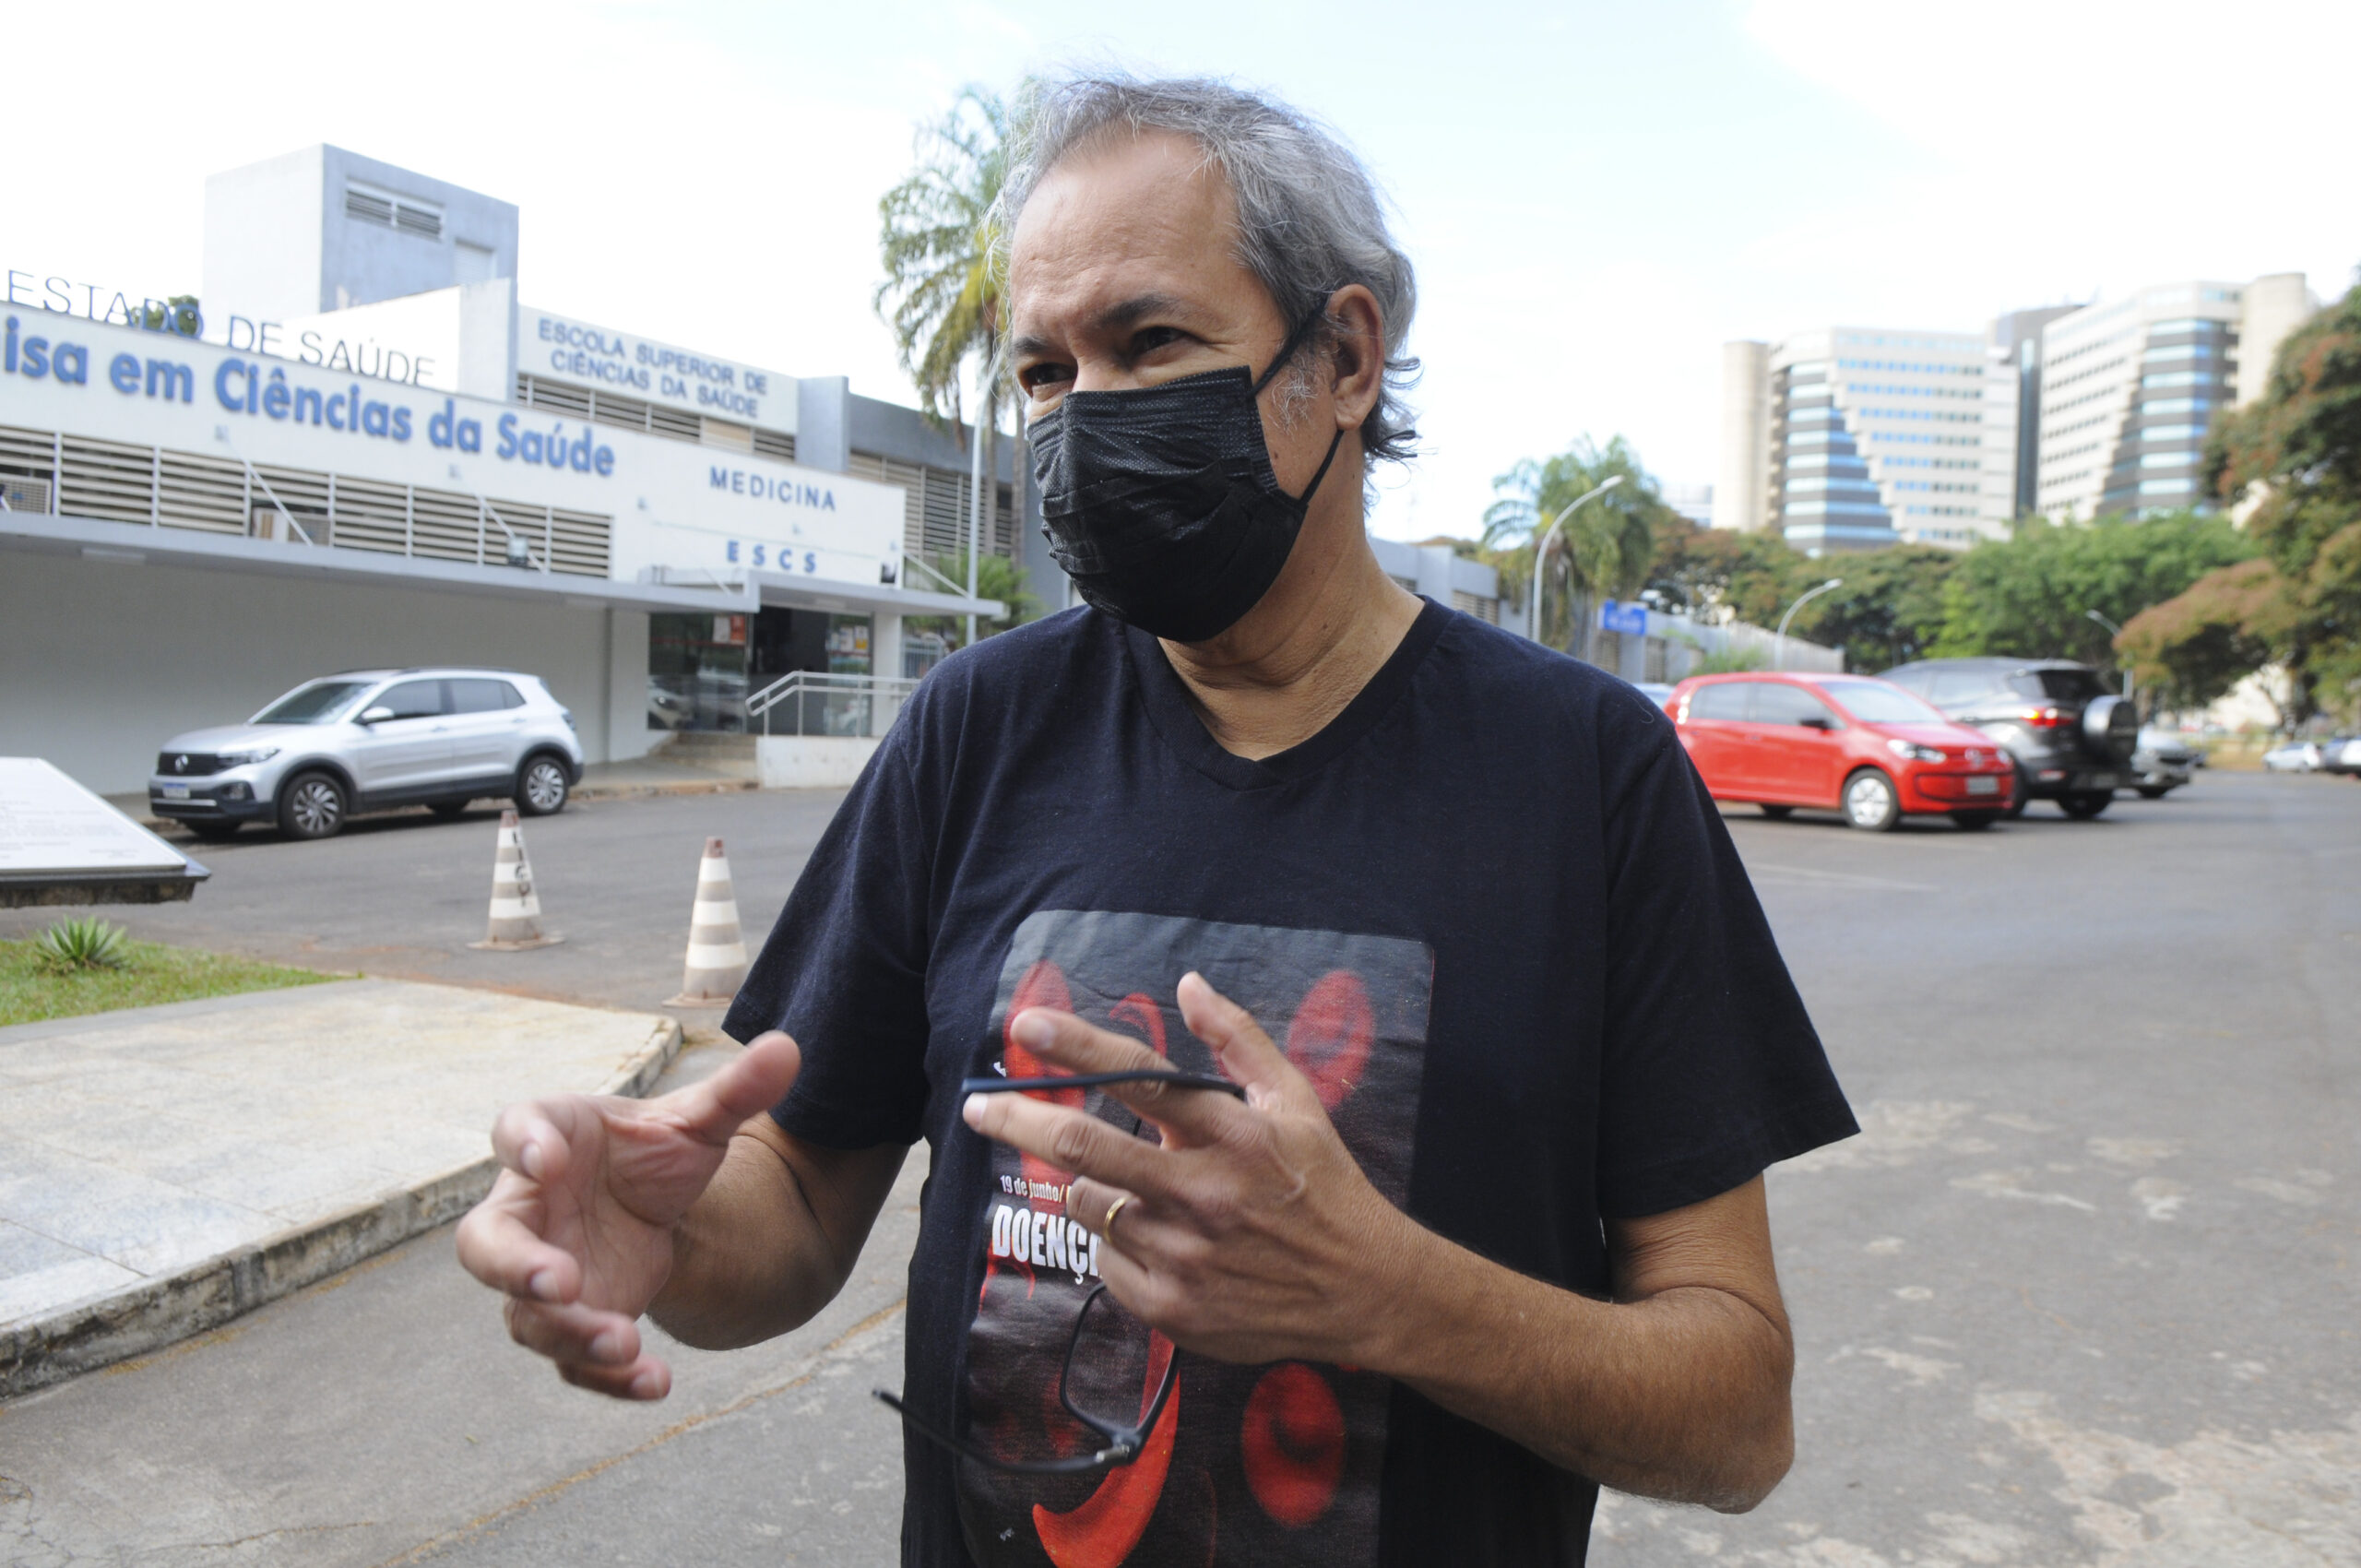 Elvis Magalhães, who coordinates the Brasiliense Association for sickle cell disease, was one of the first to heal in Brazil. Photo: Paulo H. Carvalho / Brasília Agency